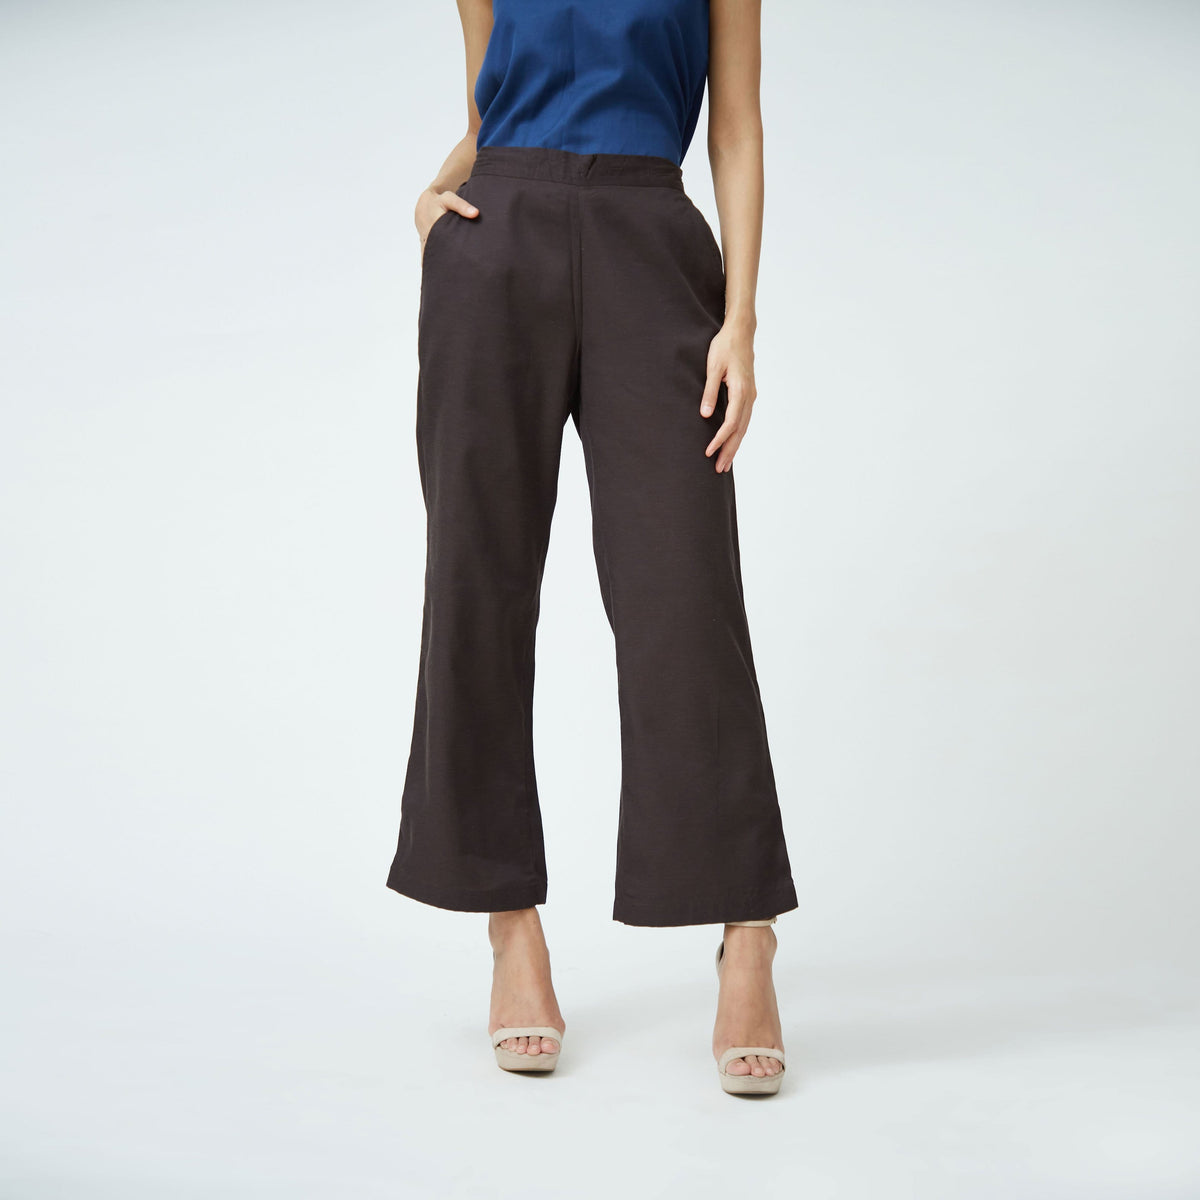 Saltpetre womens wear, indo-western pants for semi formal, casual, occassional wear. Comfortably elegant wide leg long pants in coffee brown colour. Ankle length, back elastic and side pockets.